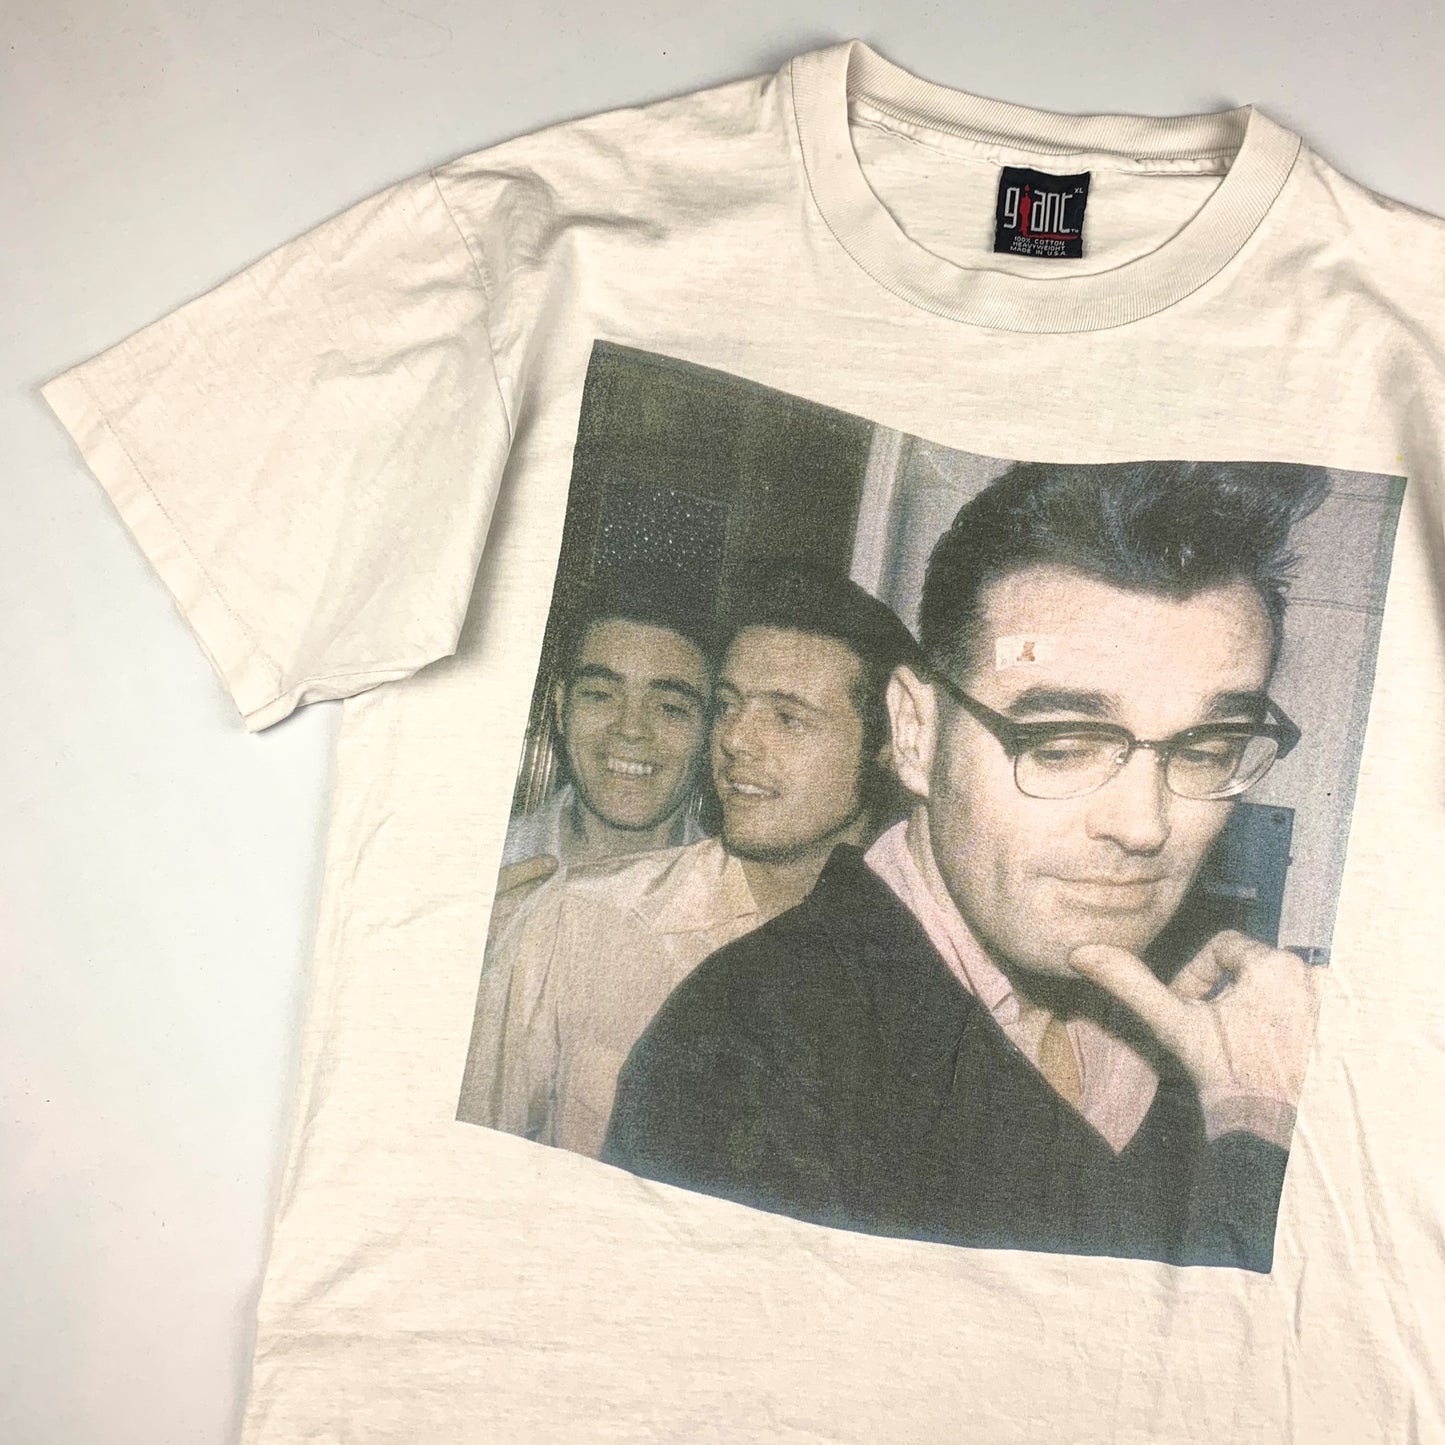 1992 Morrissey 'We Hate It When Our Friends Become Successful' (L)